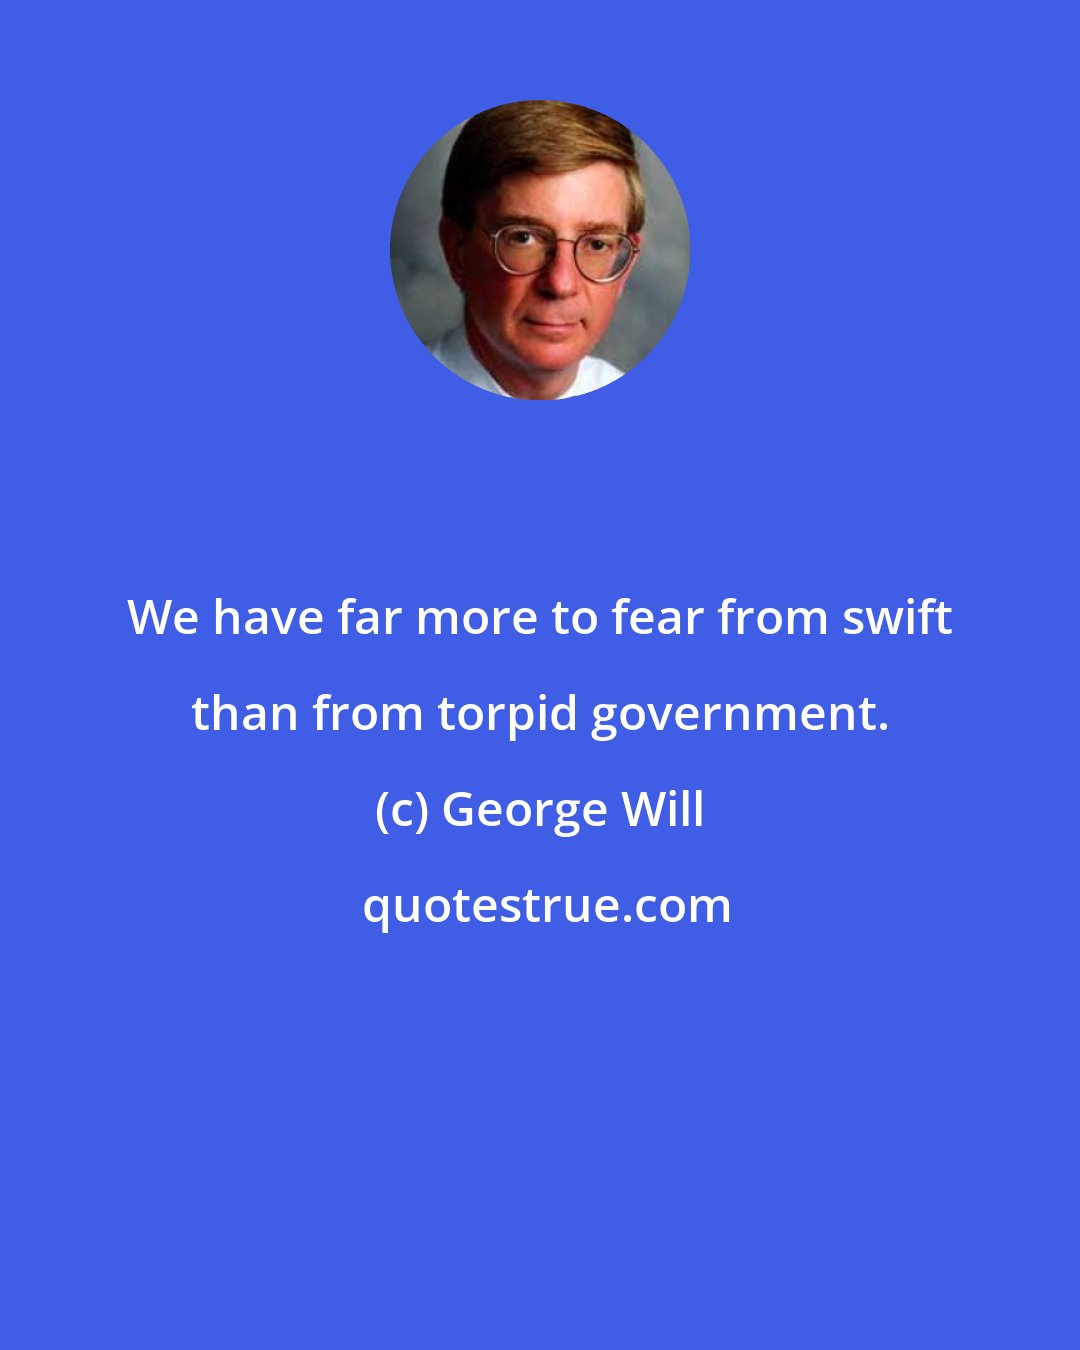 George Will: We have far more to fear from swift than from torpid government.